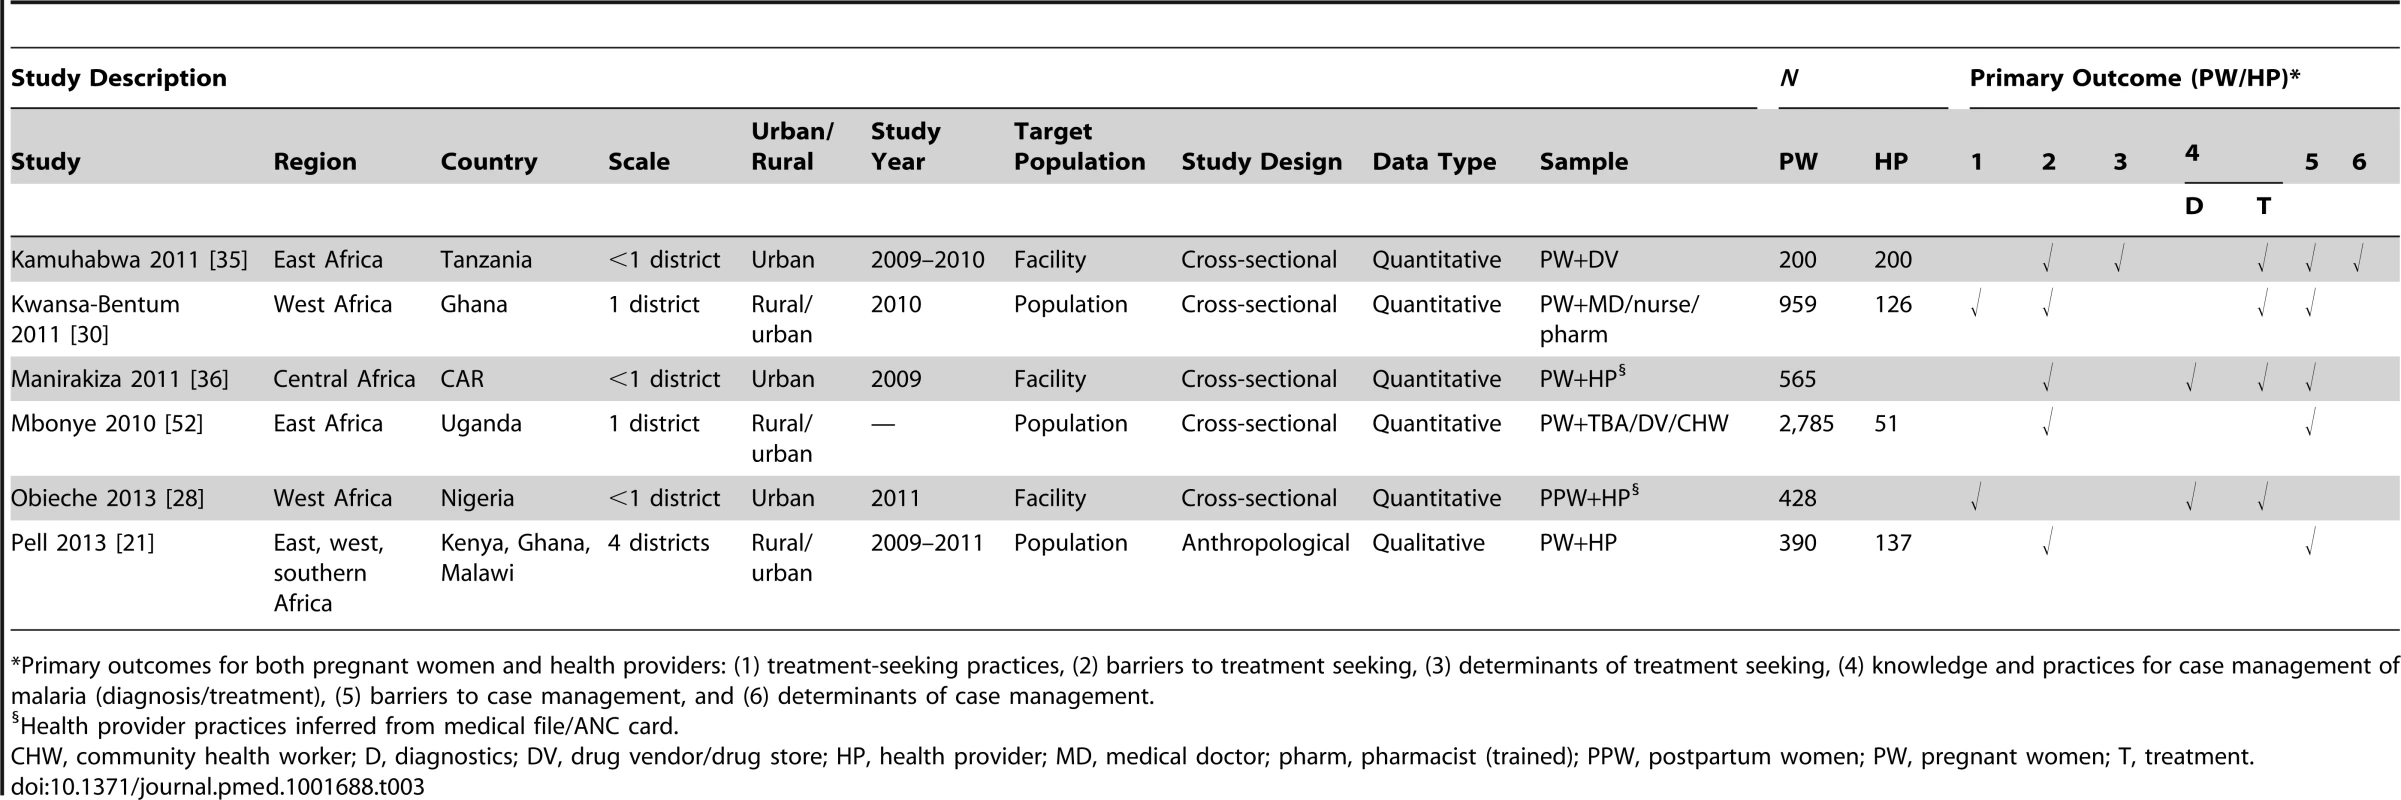 Characteristics of studies reporting outcomes for both pregnant women and health providers (six studies).